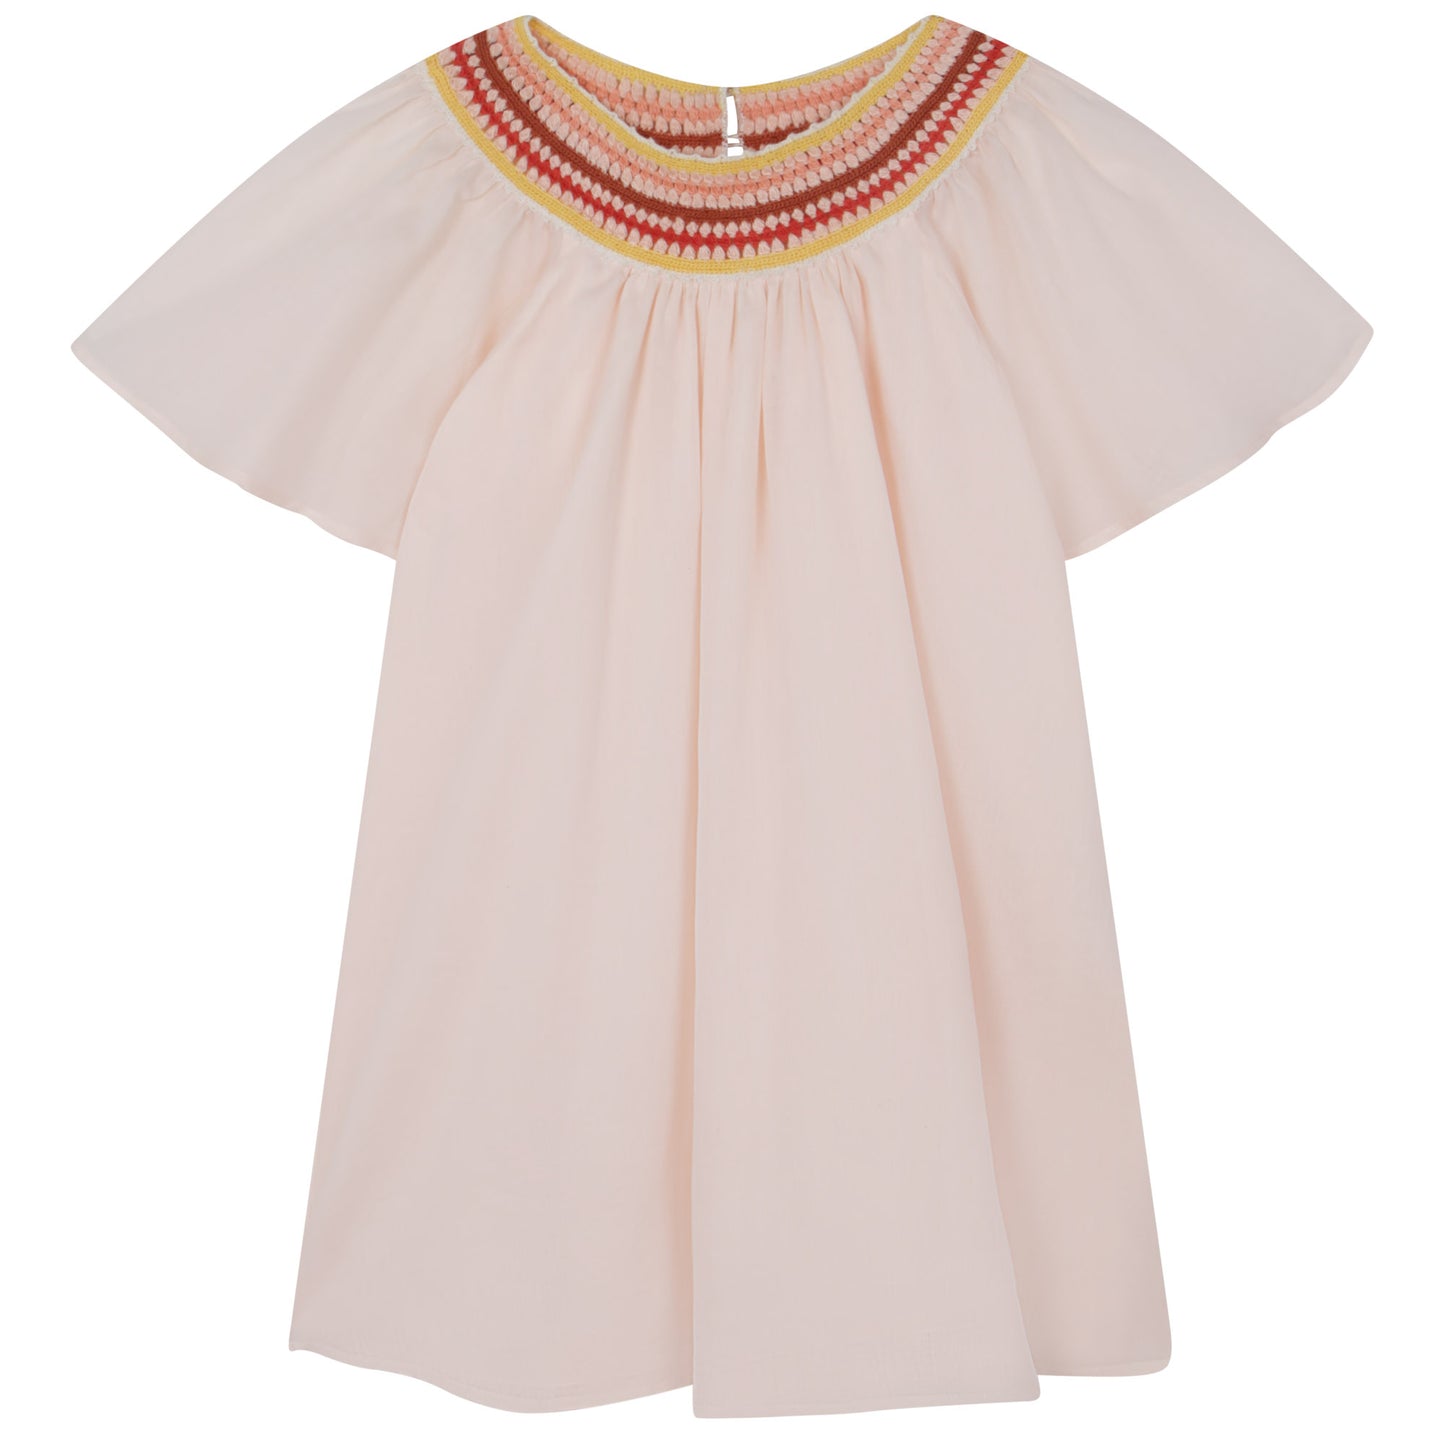 Chloe Short Sleeved Dress w/ Embroidered Collar Detail